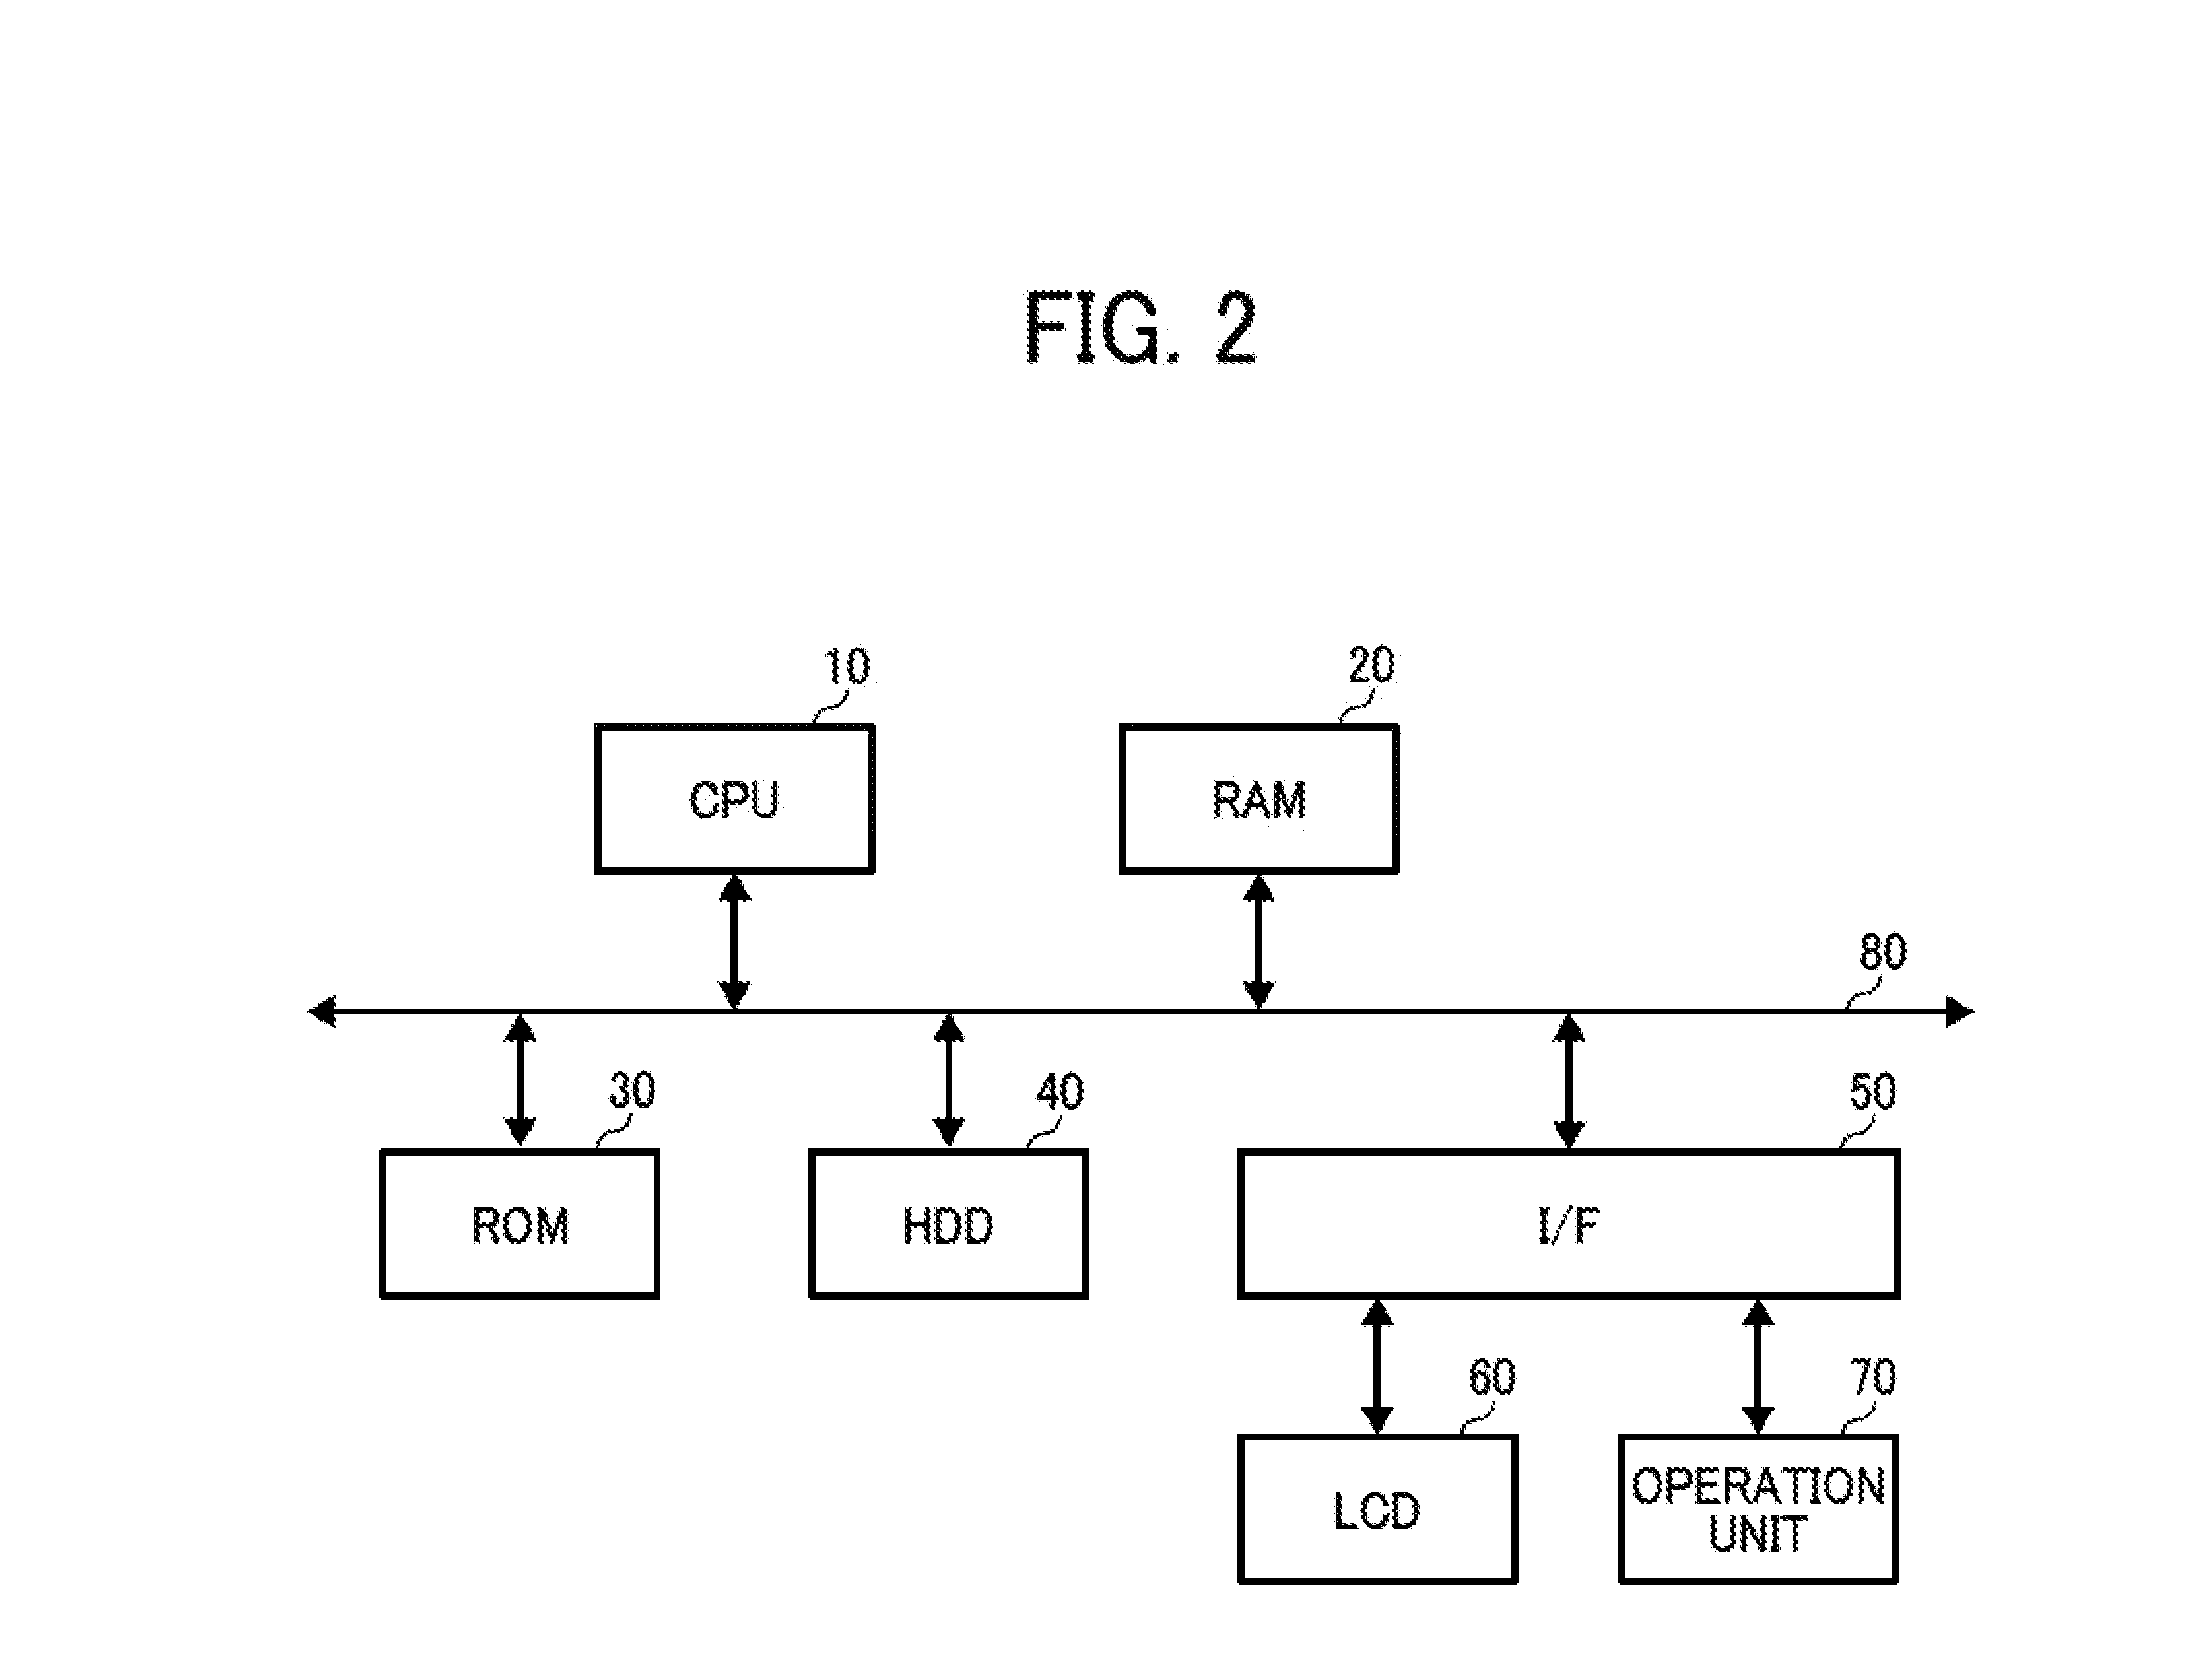 Image processing system, process execution control apparatus, and image generation-output control apparatus